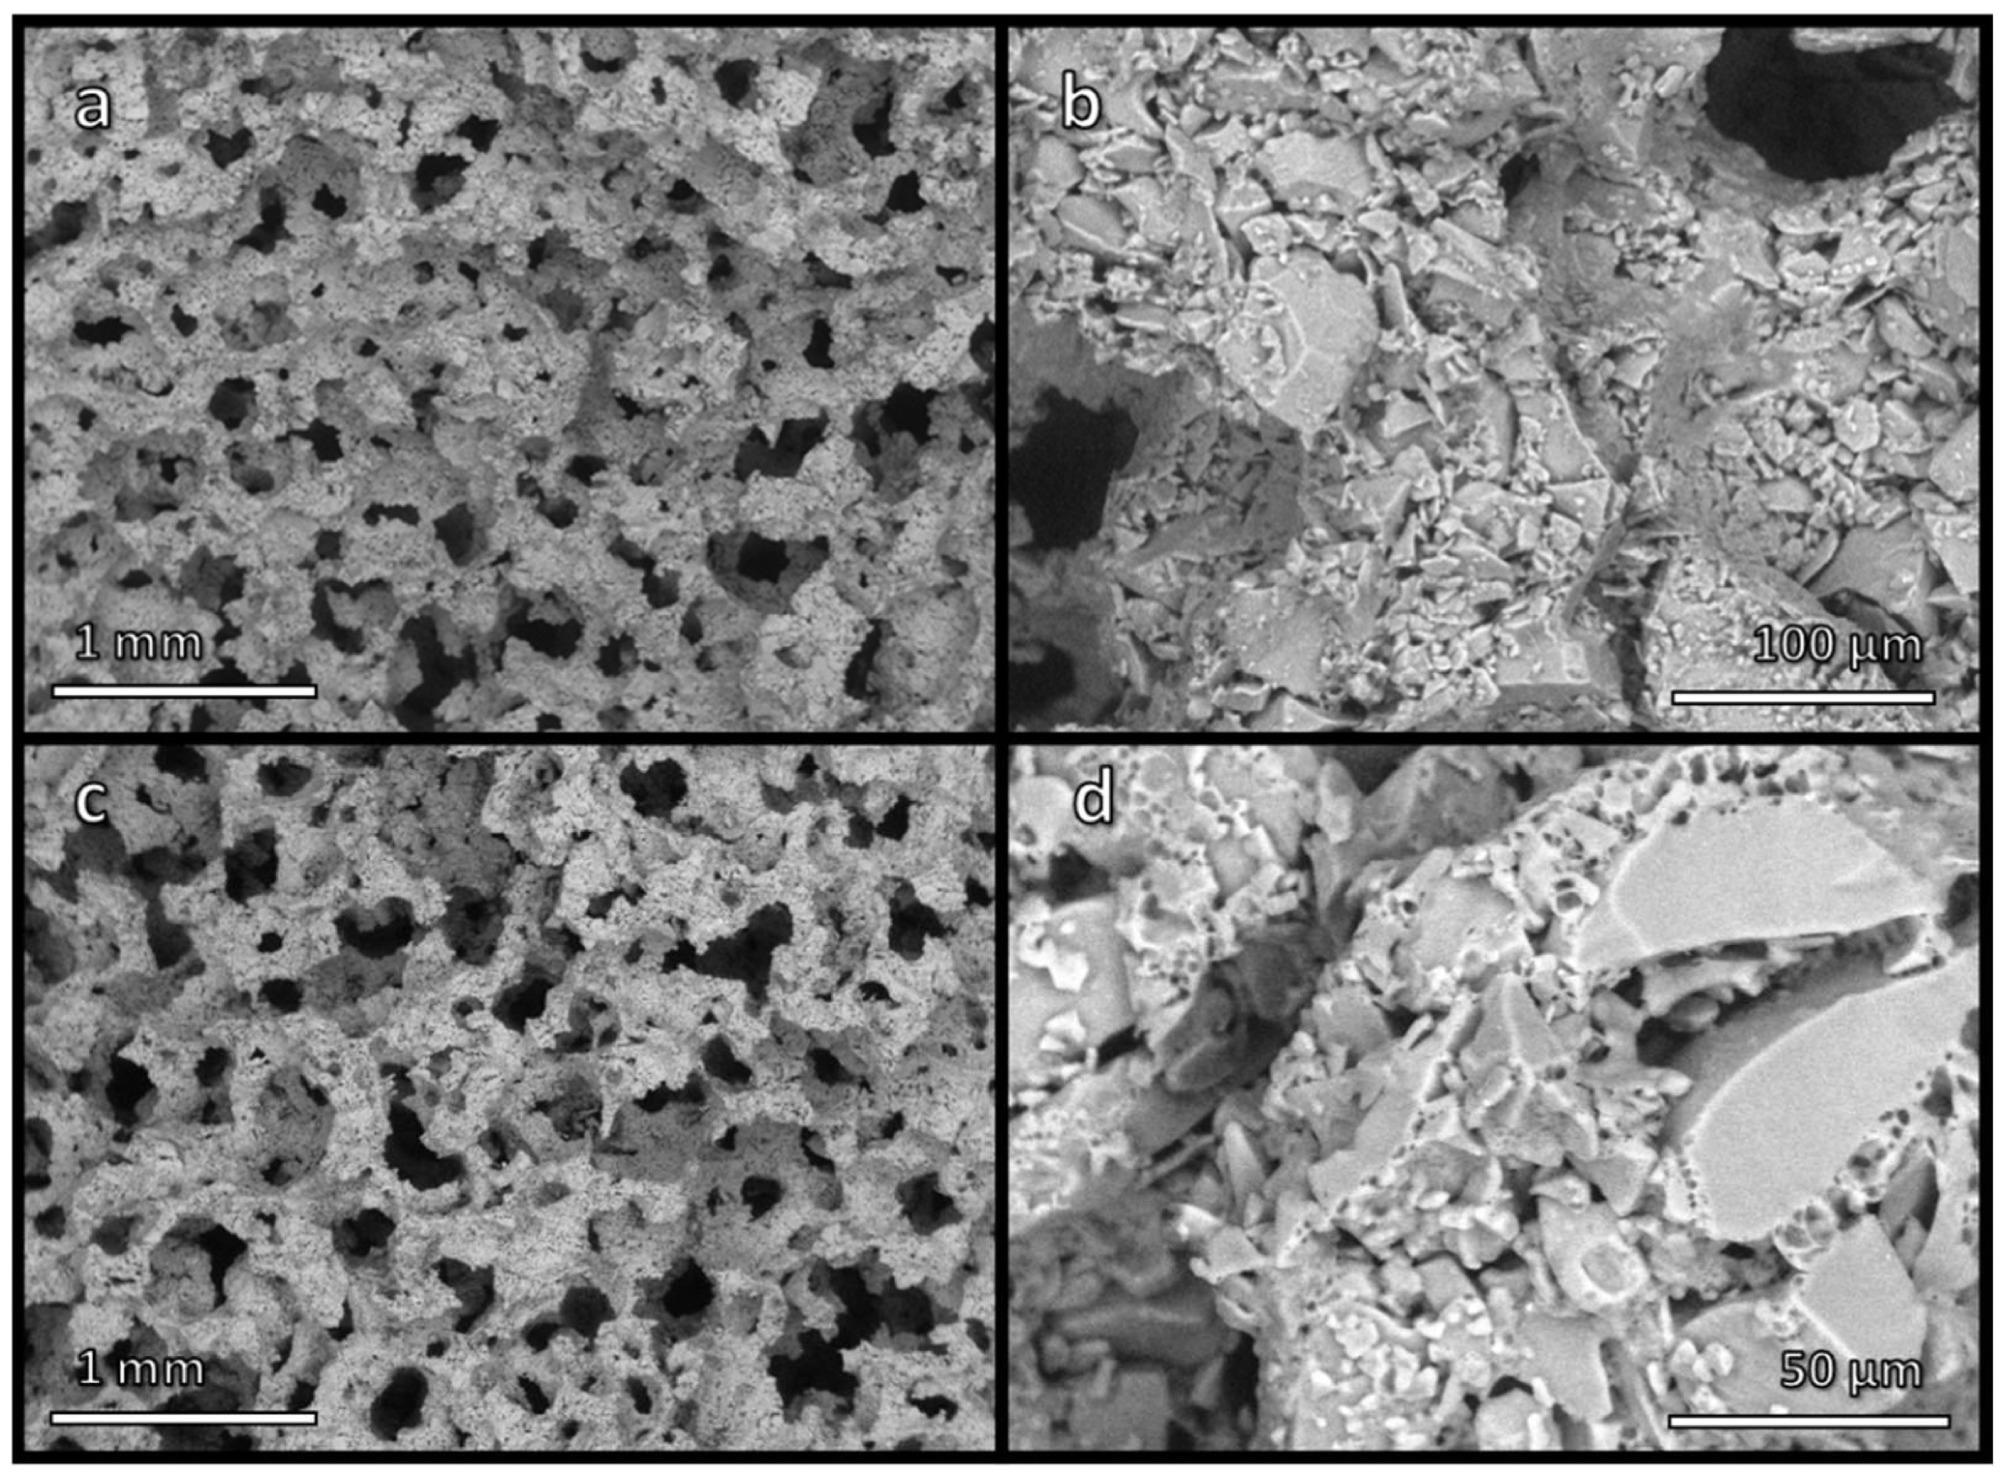 Low and high magnification micrographs of (a,b) foamed suspension of glass particles in alkaline solution, after drying; (c,d) glass foam, after firing at 650 °C.